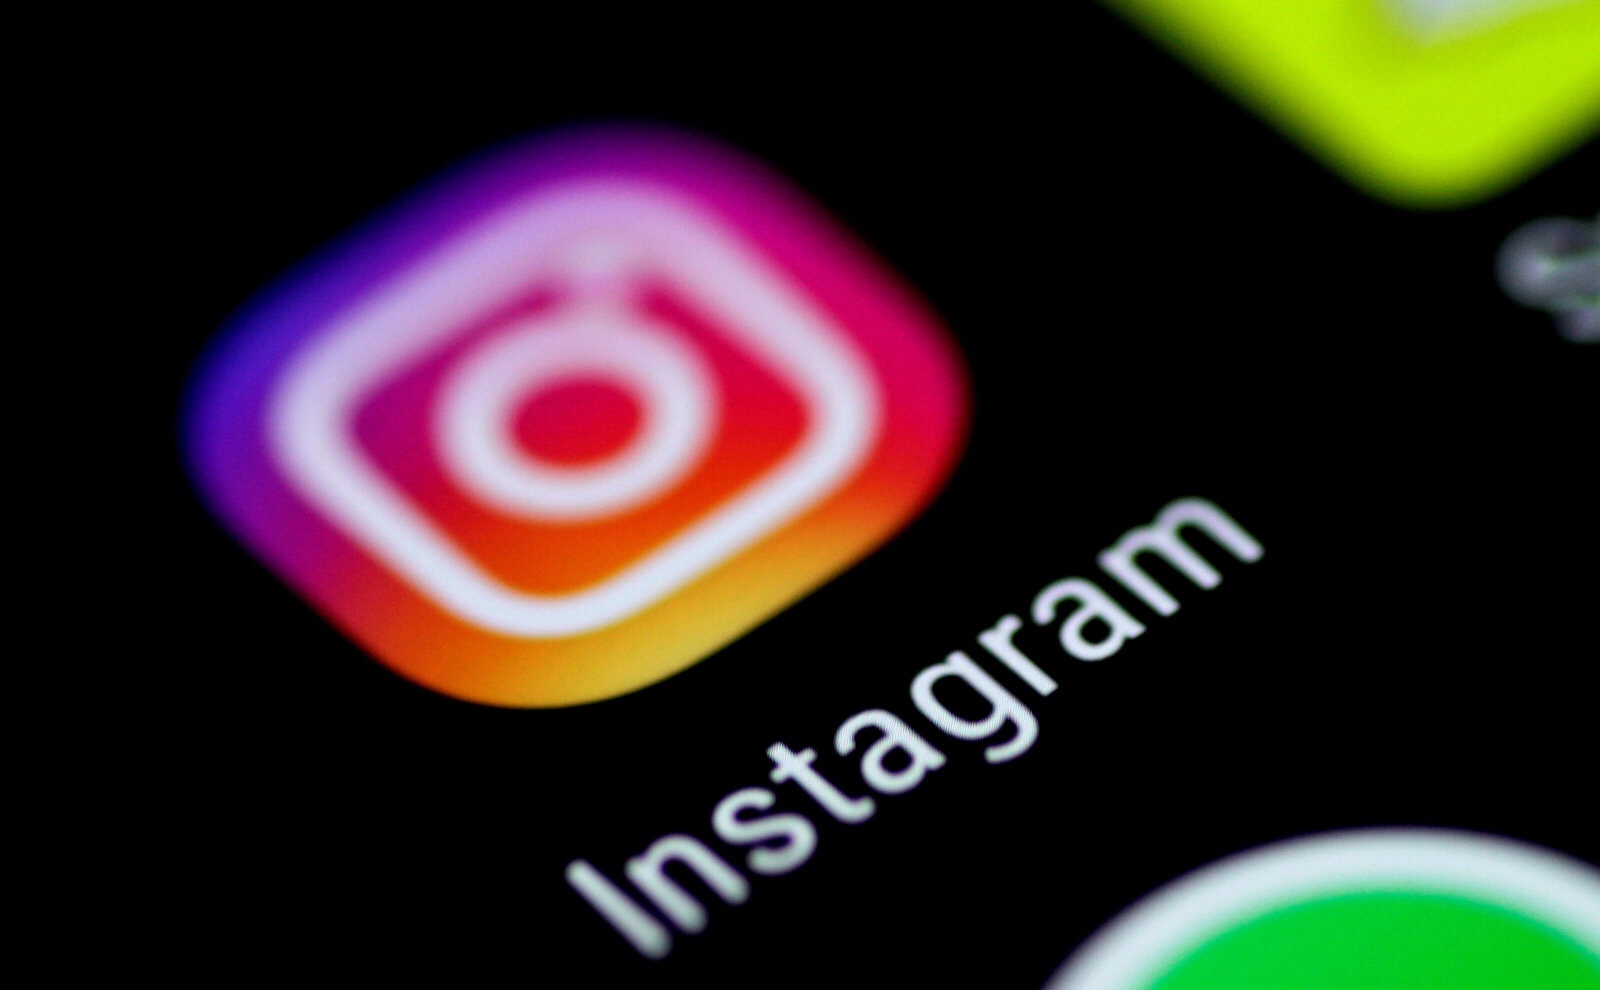 Users will be able to download all of their Instagram data